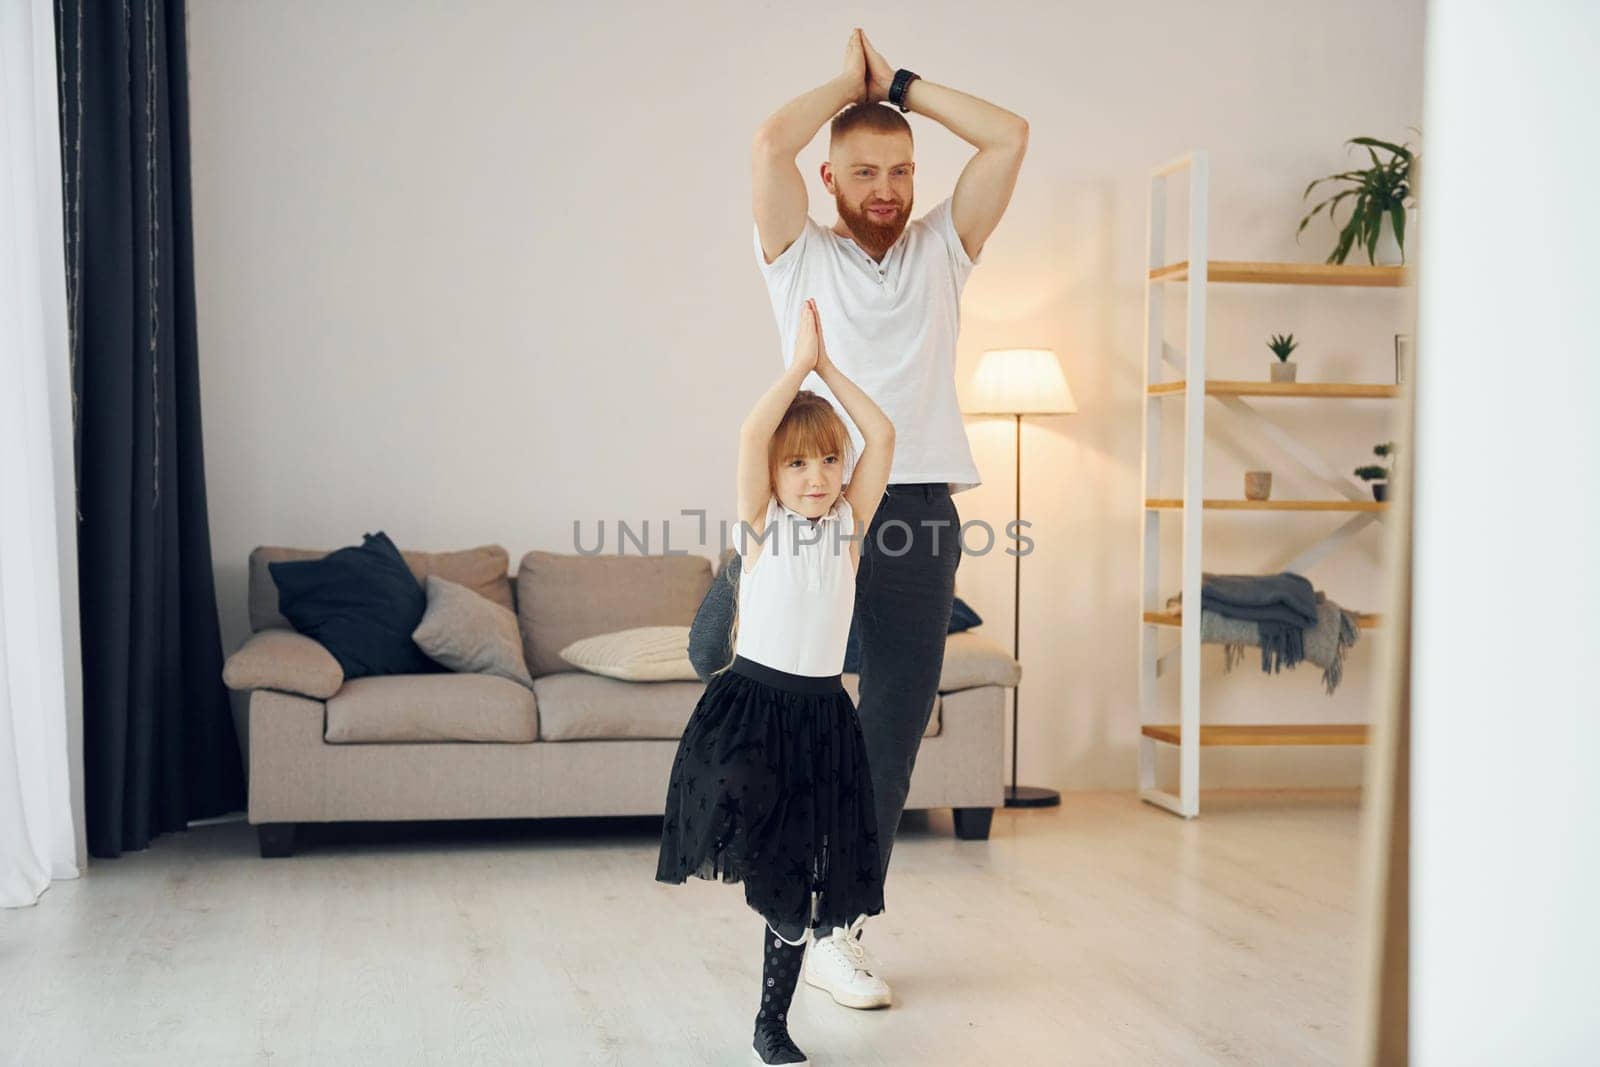 Teaching how to dance. Father with his little daughter is at home together.